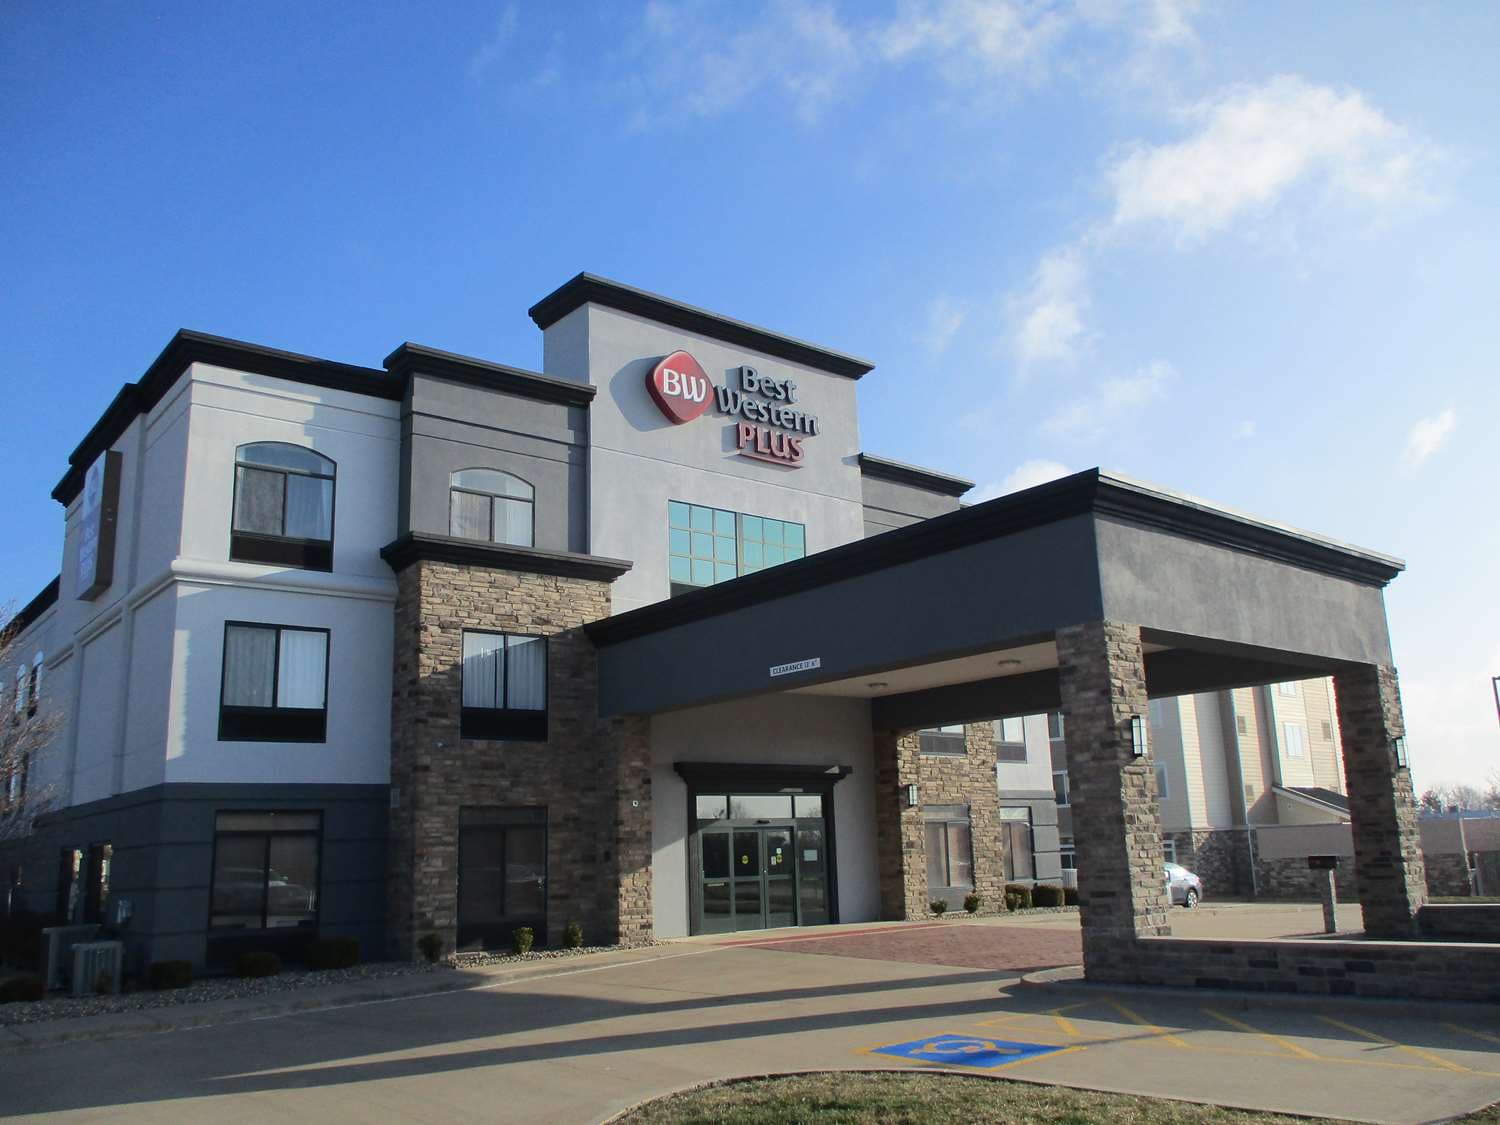 Hotels & Motels - Visit Champaign County